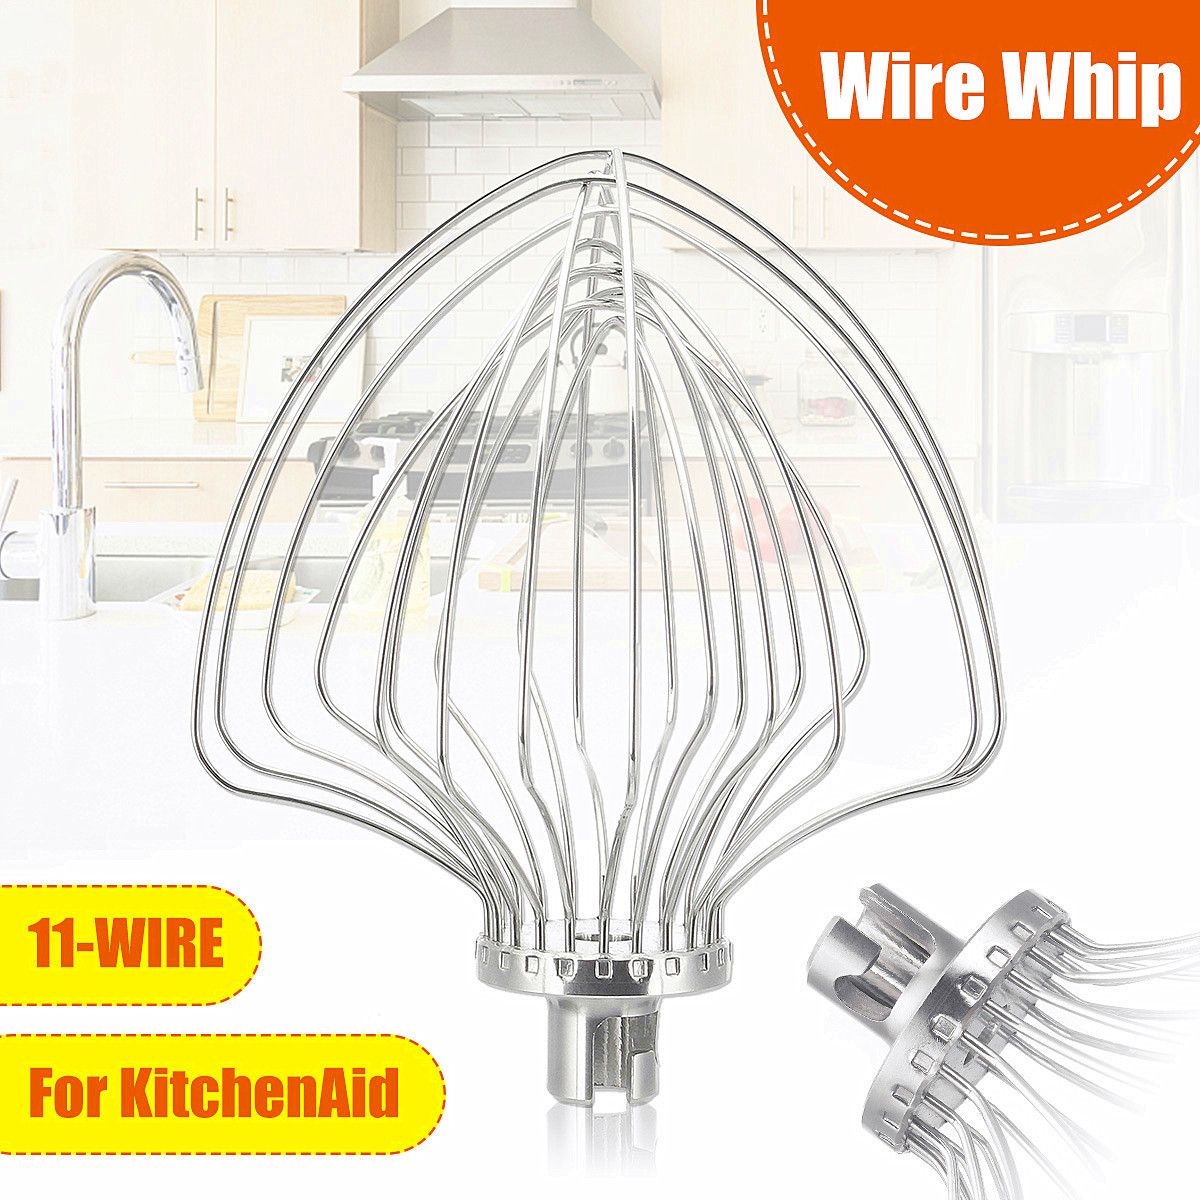 11-Wire-Whip-Egg-Beater-Mixer-Whisk-Beater-Stainless-Steel-For-KitchenAid-5K7EW-1520792